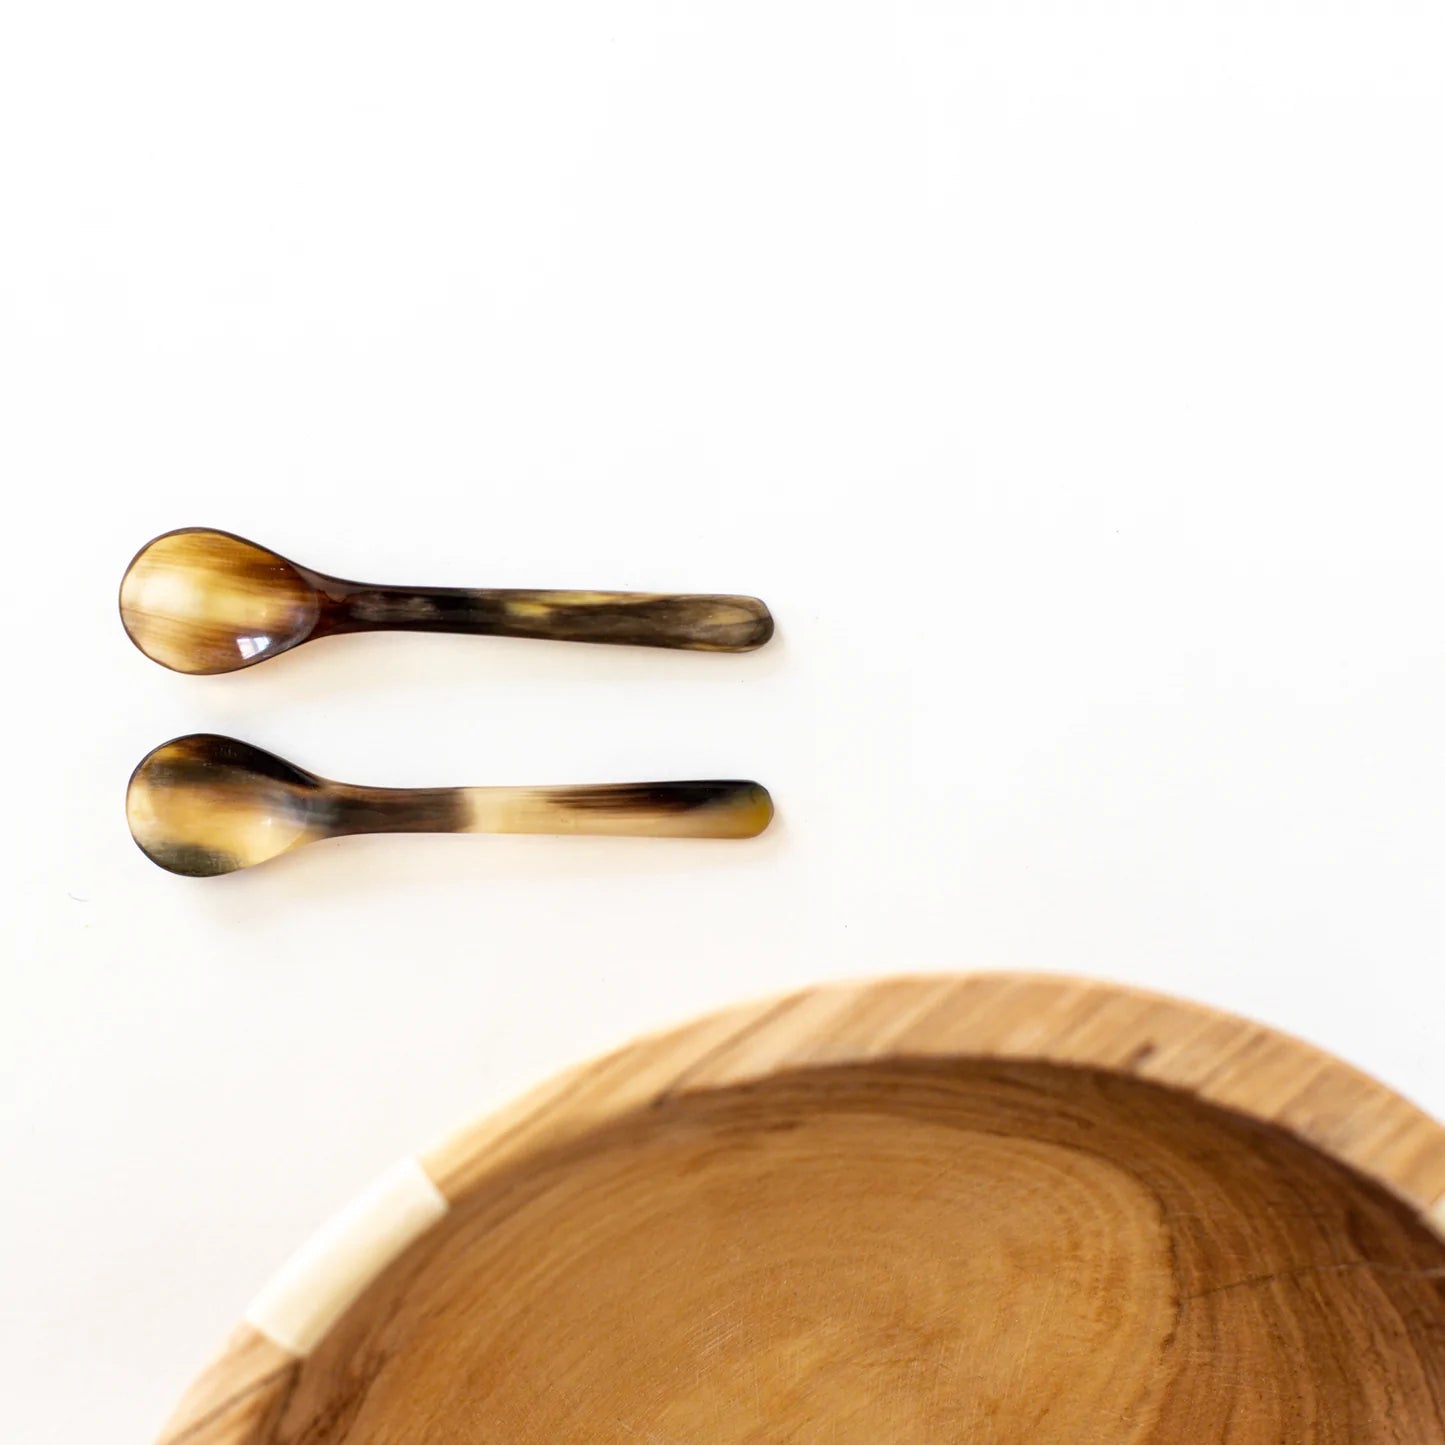 Horn Demitasse Spoon- Sold Individually